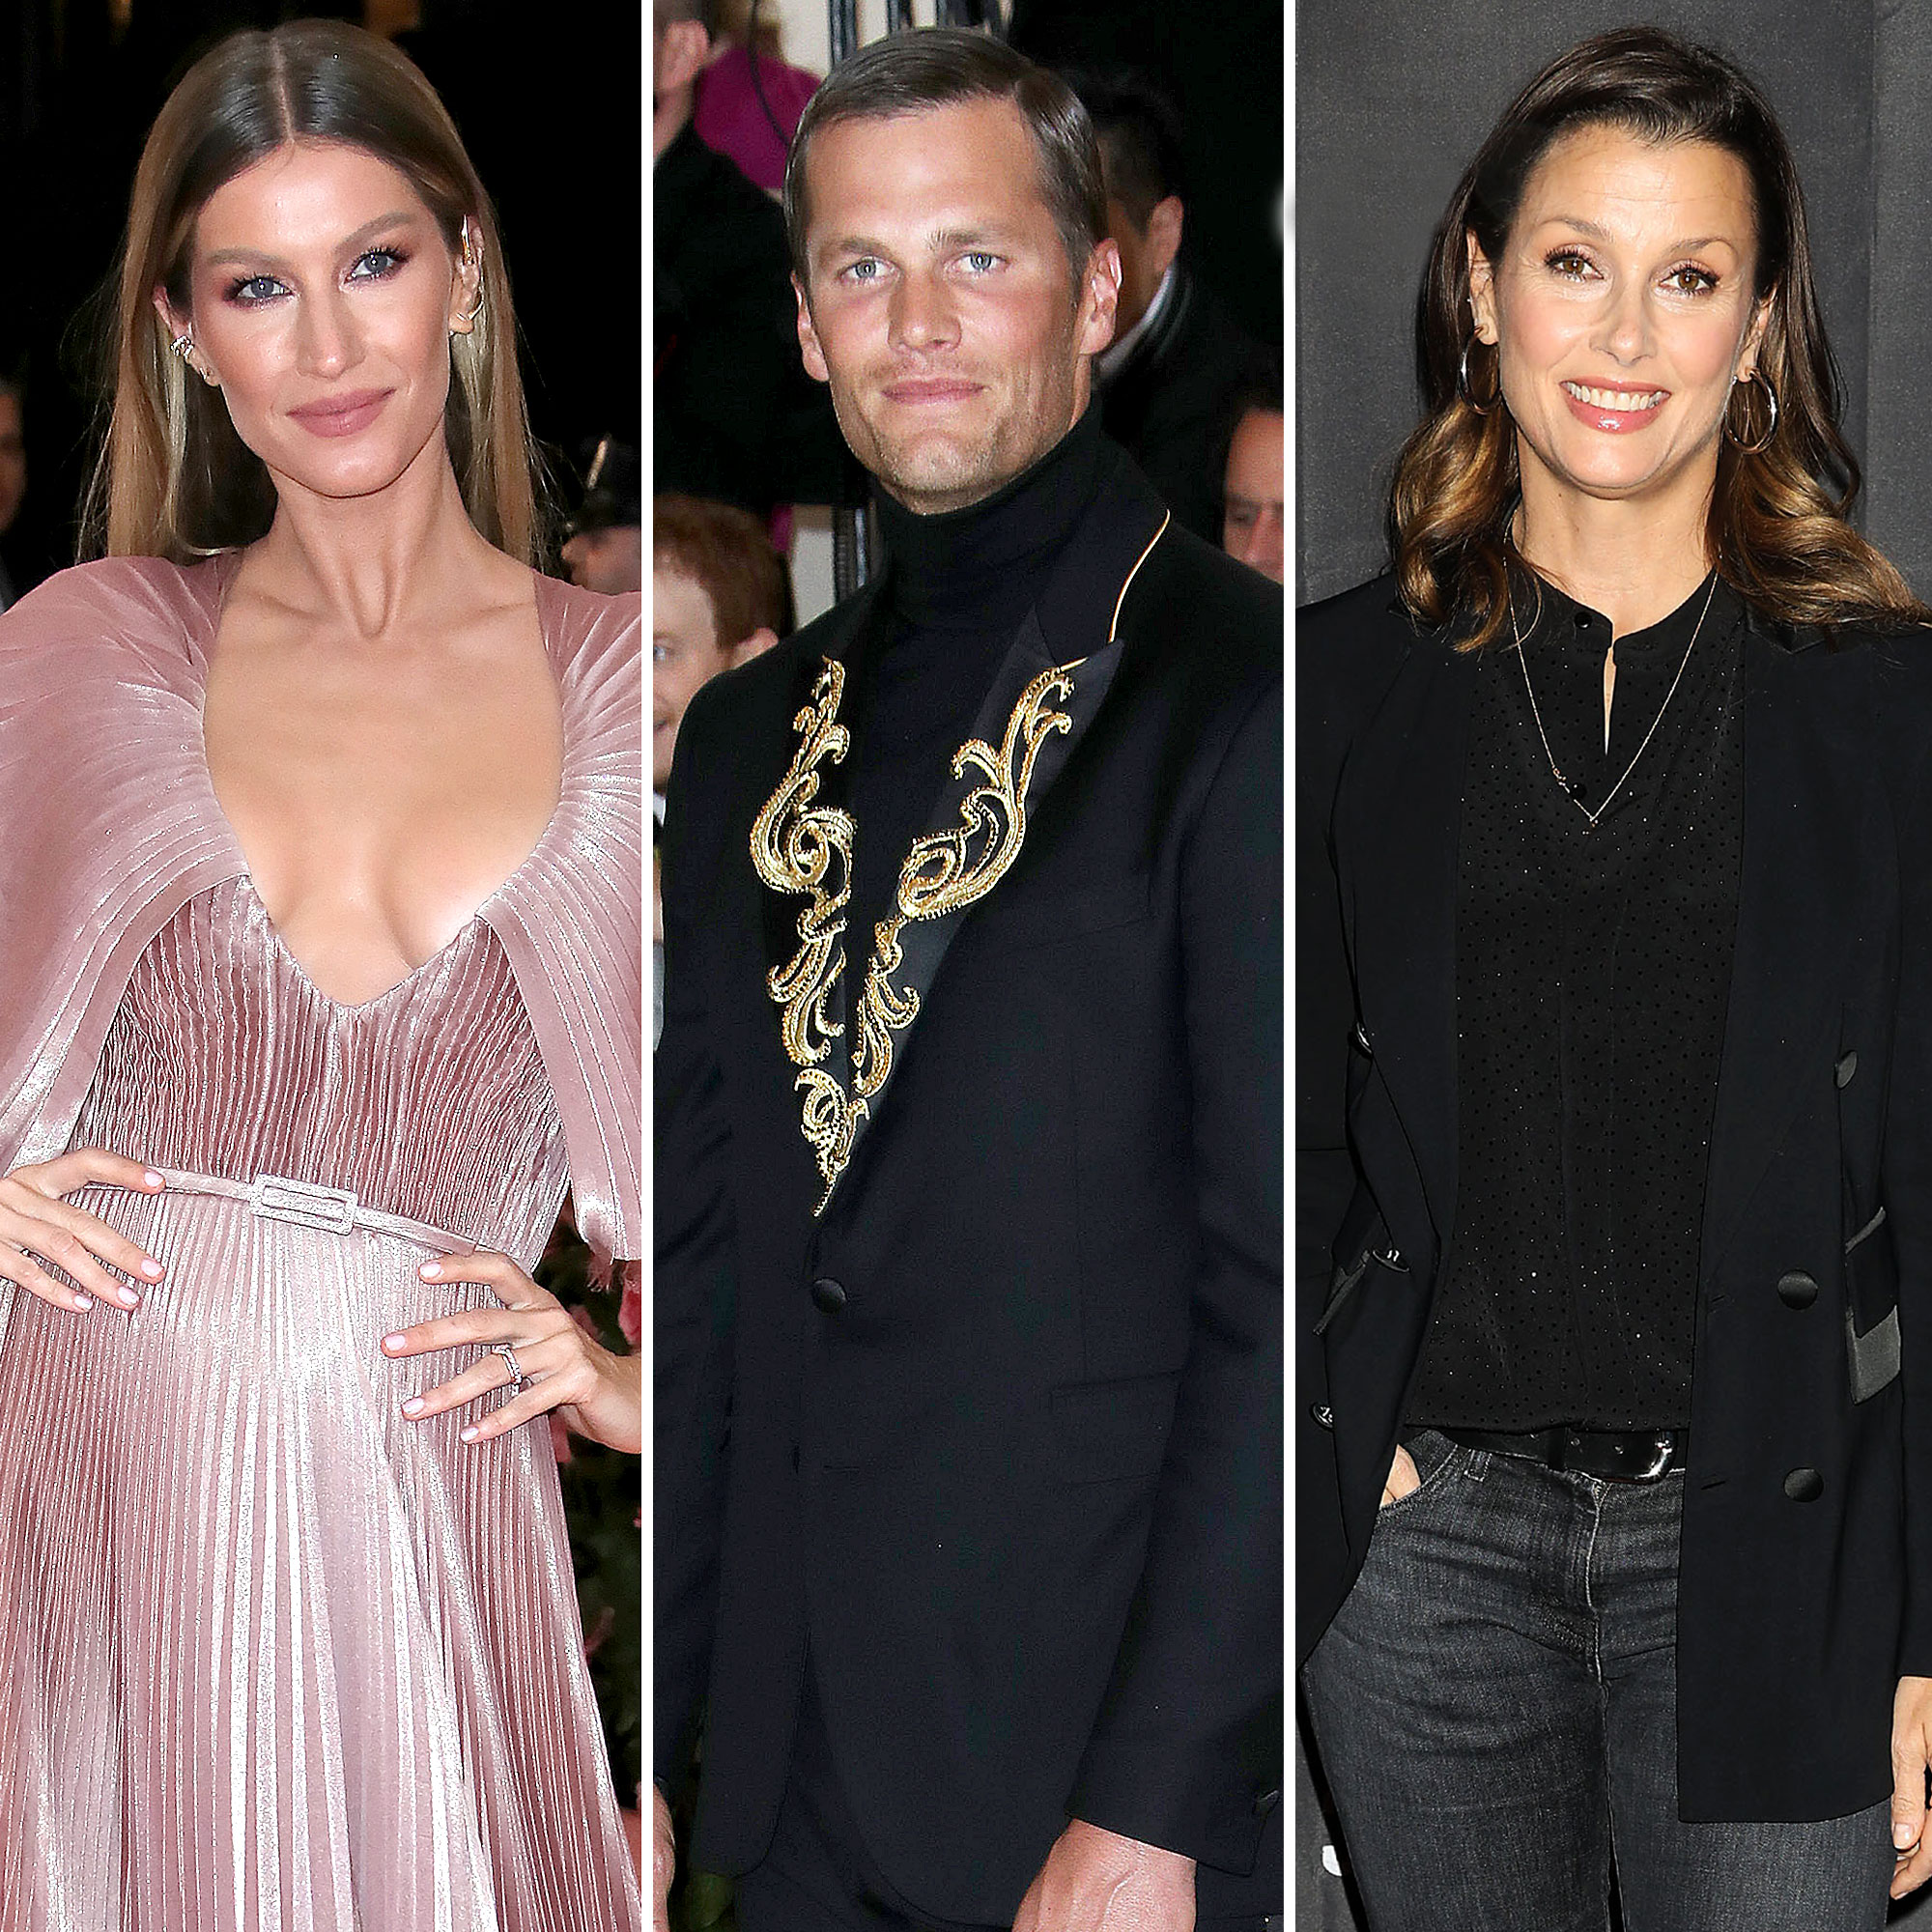 Who is Tom Brady's ex-wife Gisele Bündchen and what is her net worth?